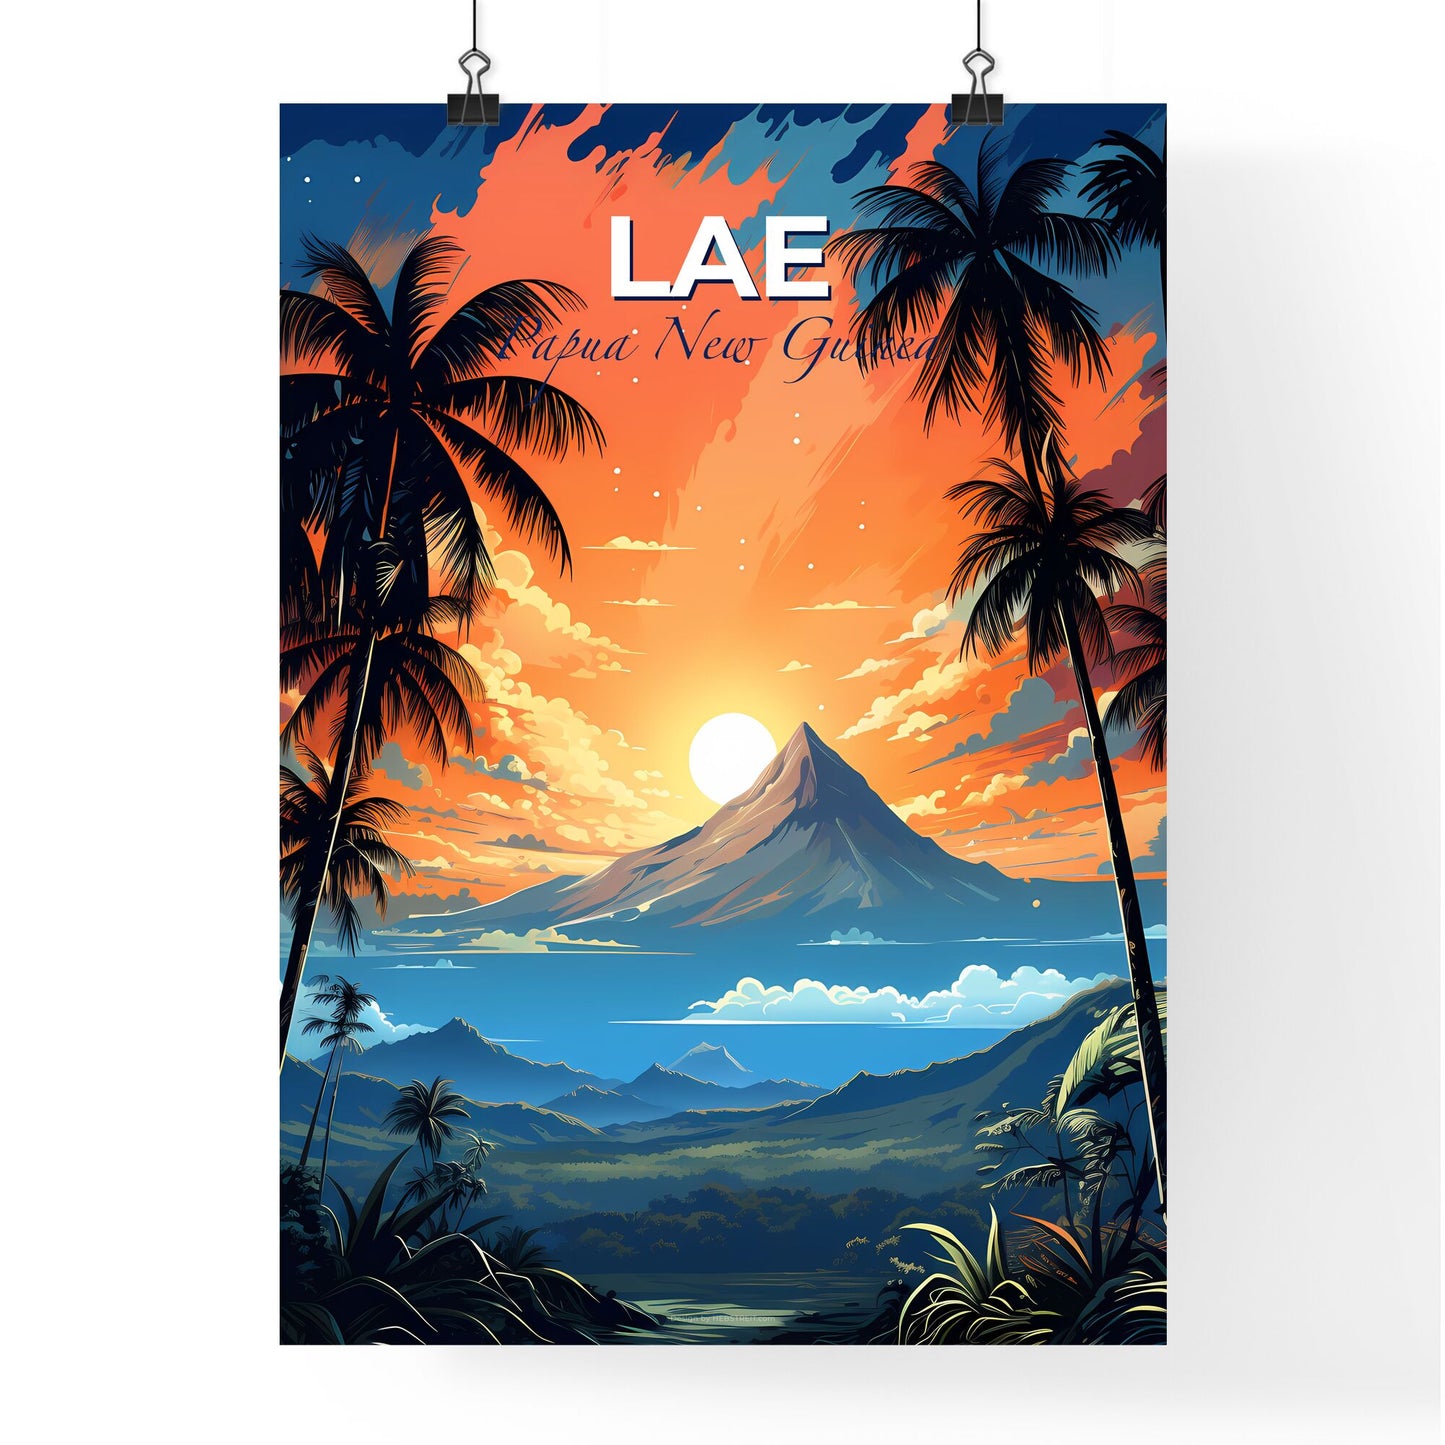 Vibrant Artistic Landscape of Lae in Papua New Guinea with Mountains and Palm Trees Skyline Default Title